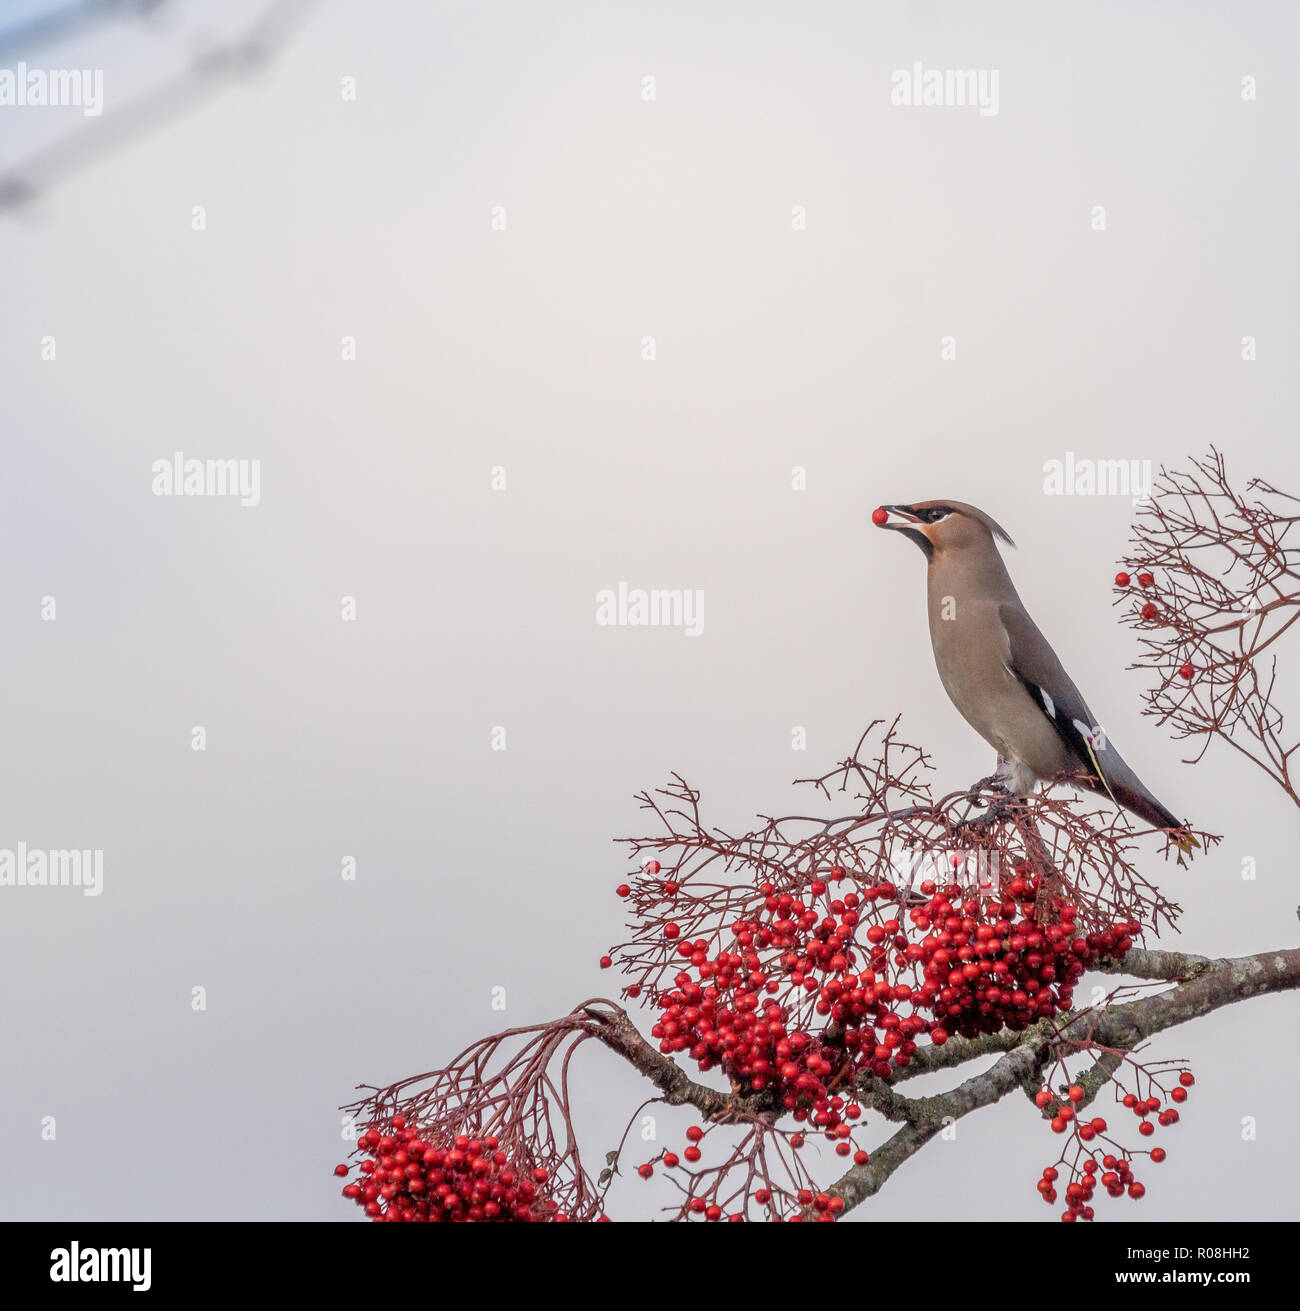 A Waxwing, Bombycilla garrulus, with a berry in it's beak n a tree with red berries taken in Norfolk, UK Stock Photo